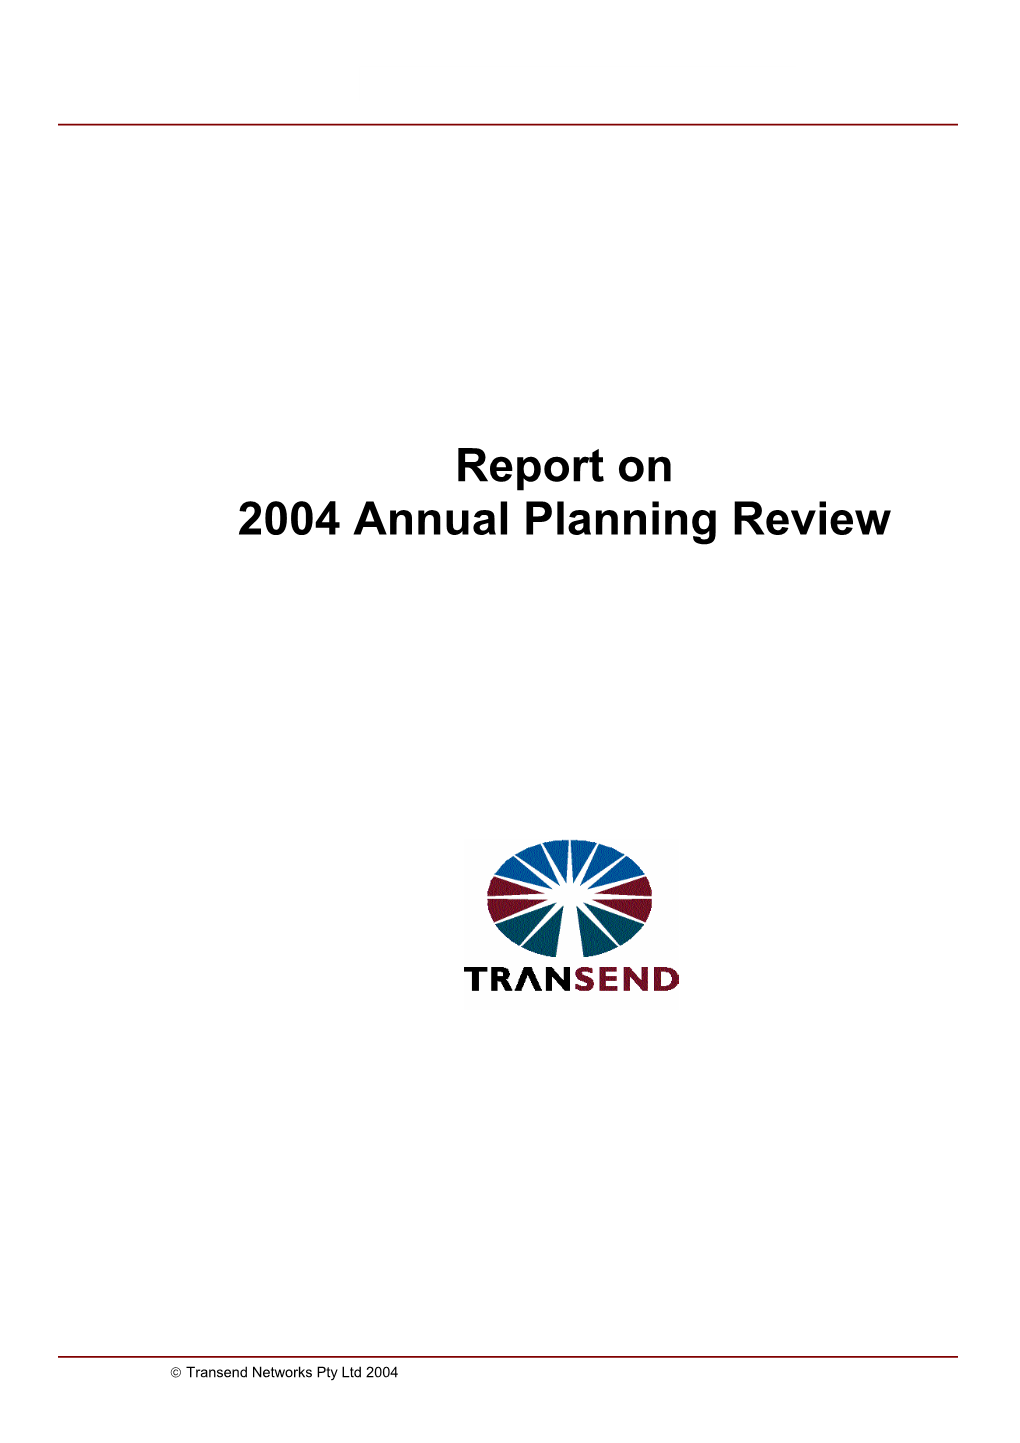 Report on 2004 Annual Planning Review